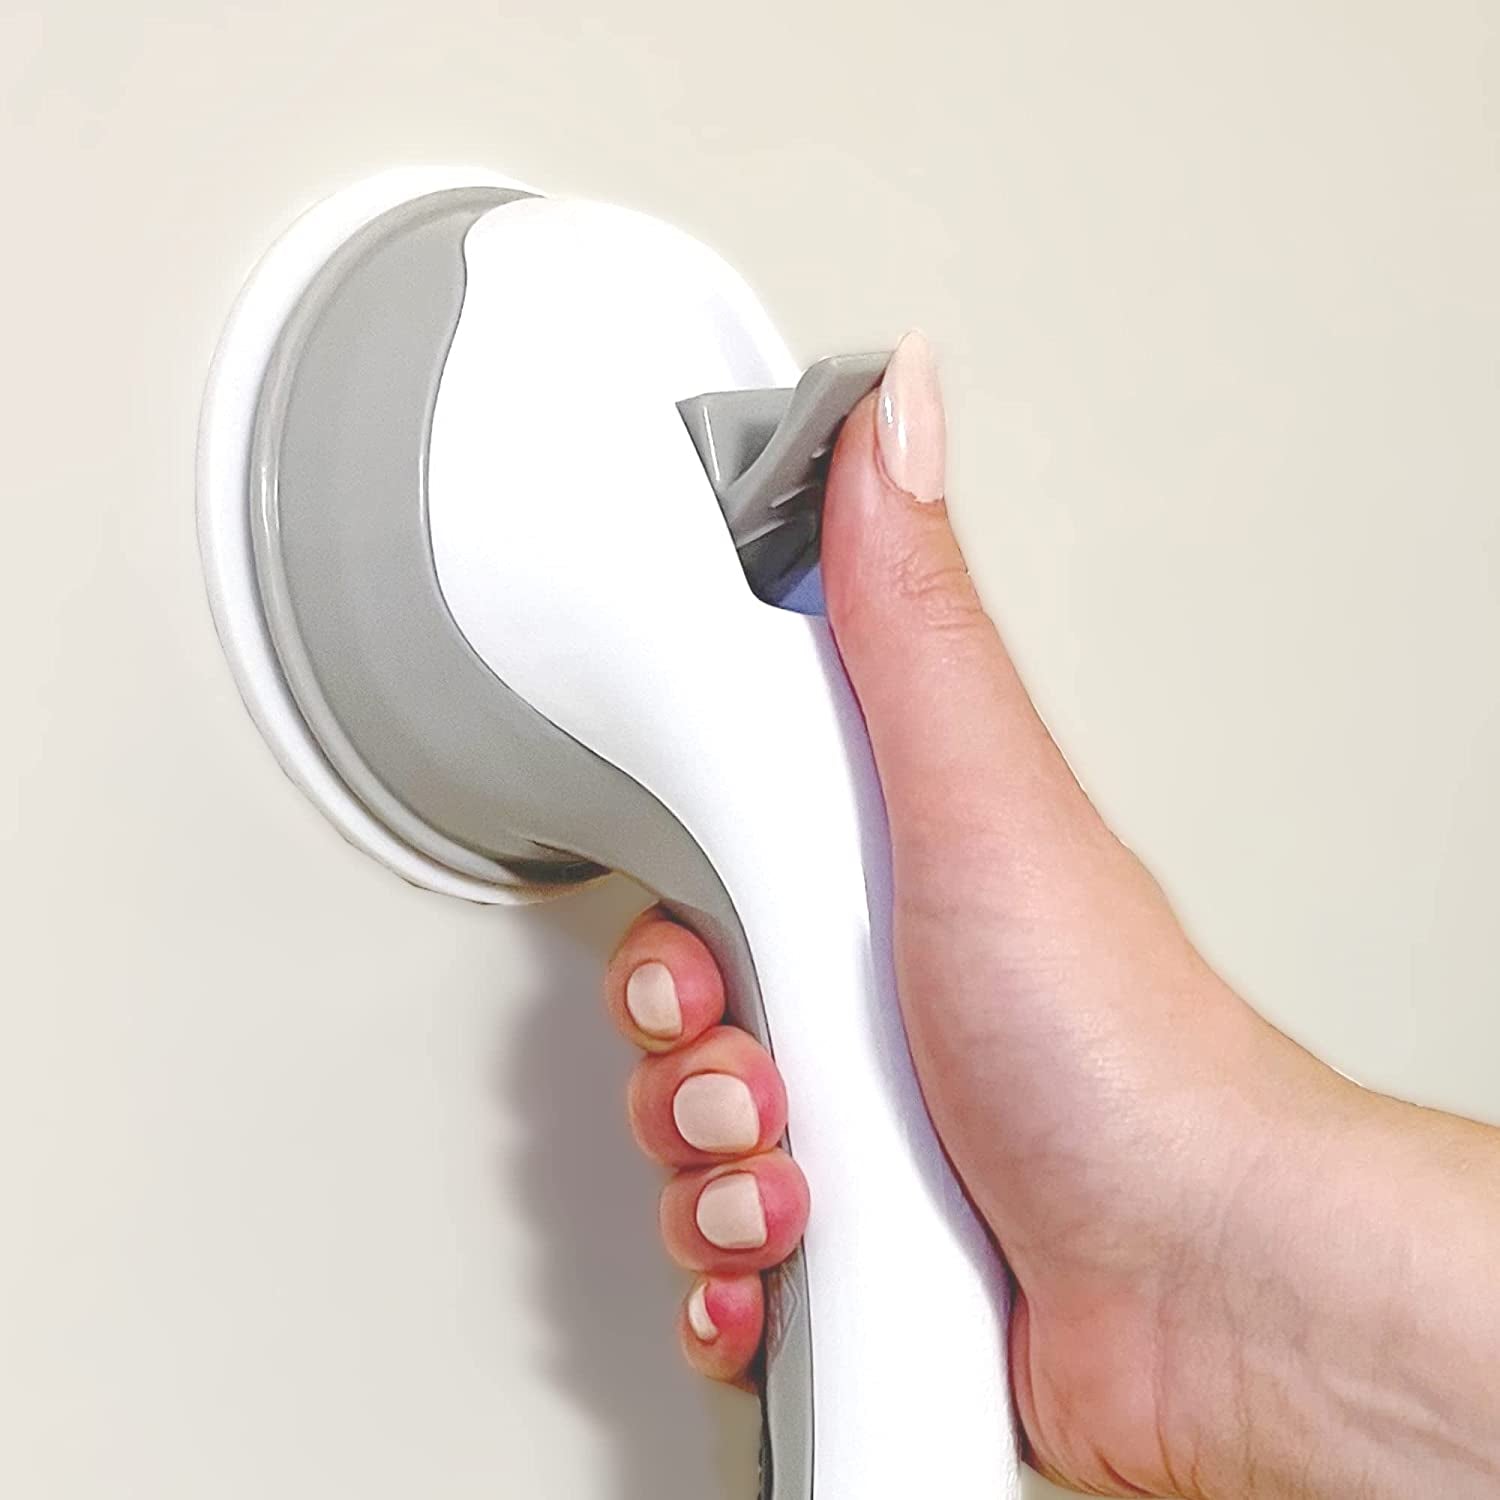 Suction Cup Grab Bar: Safety Bathroom Assist Handle 